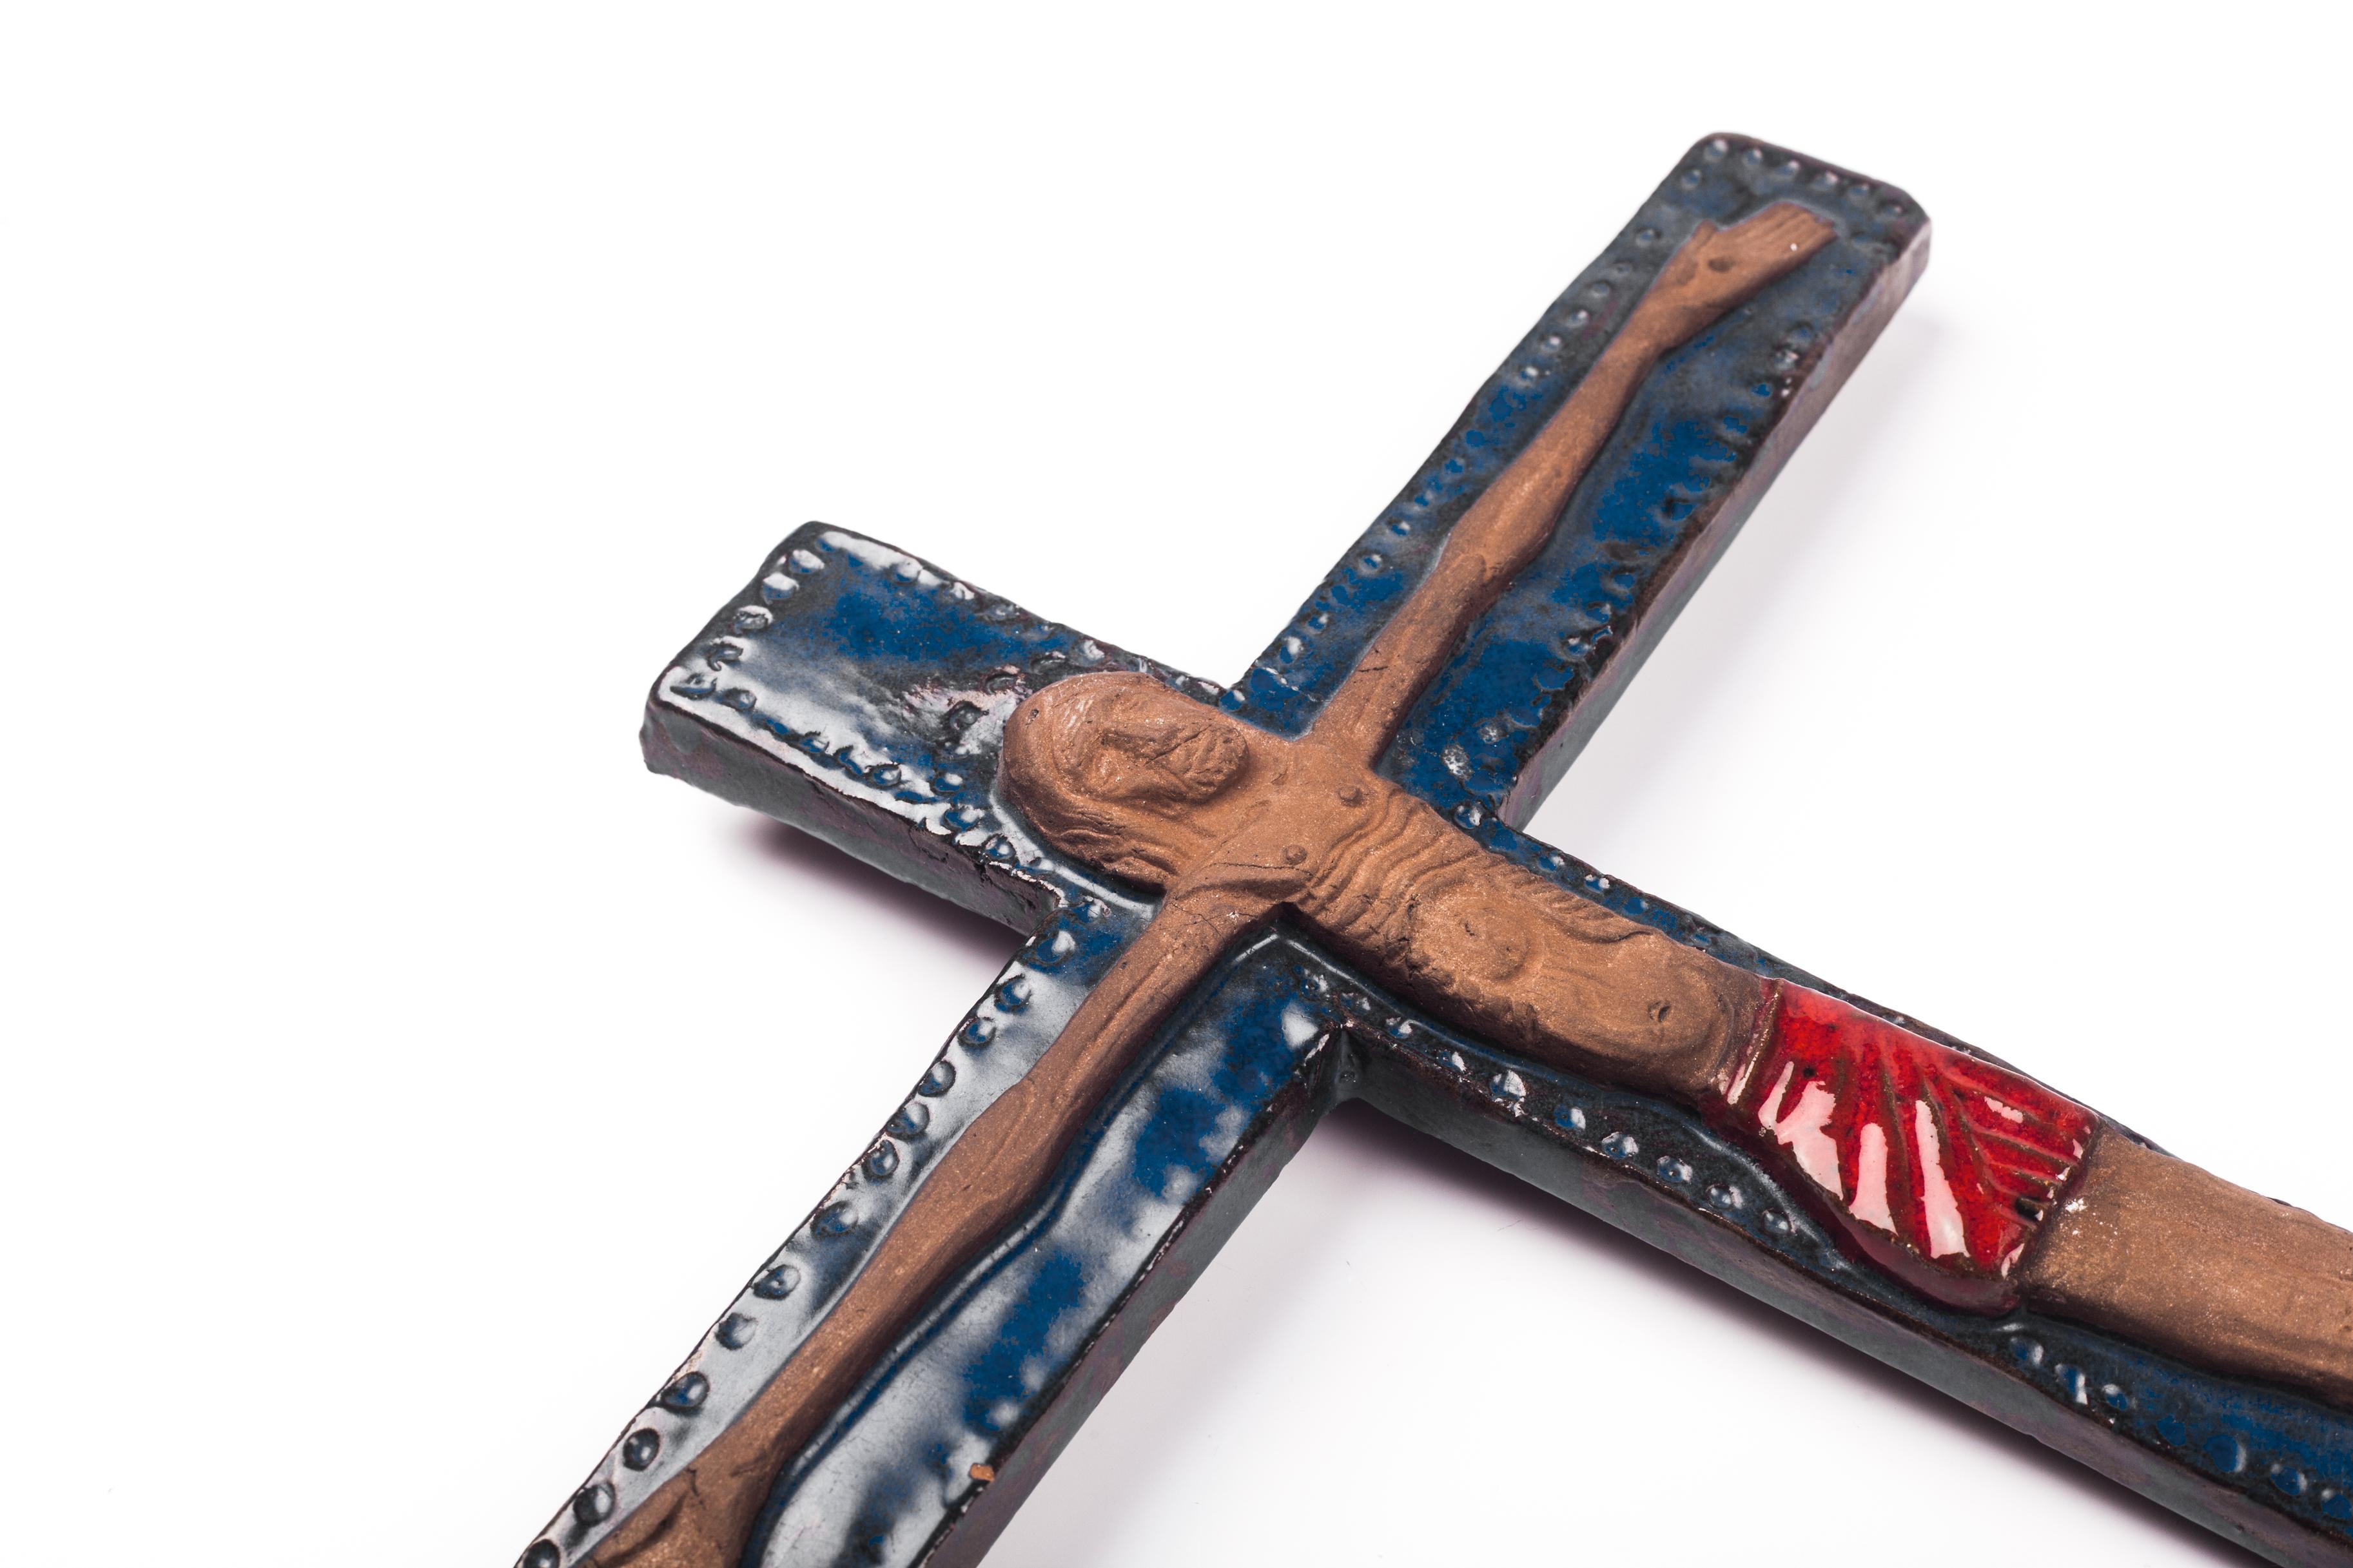 Large glazed wall cross in Klein blue with a red swathed Christ figure in matte clay. This is a handmade one-of-a-kind piece that was part of a large collection of Belgian crosses made by artisan potters in the 1950s-1970s. A unique decorative item